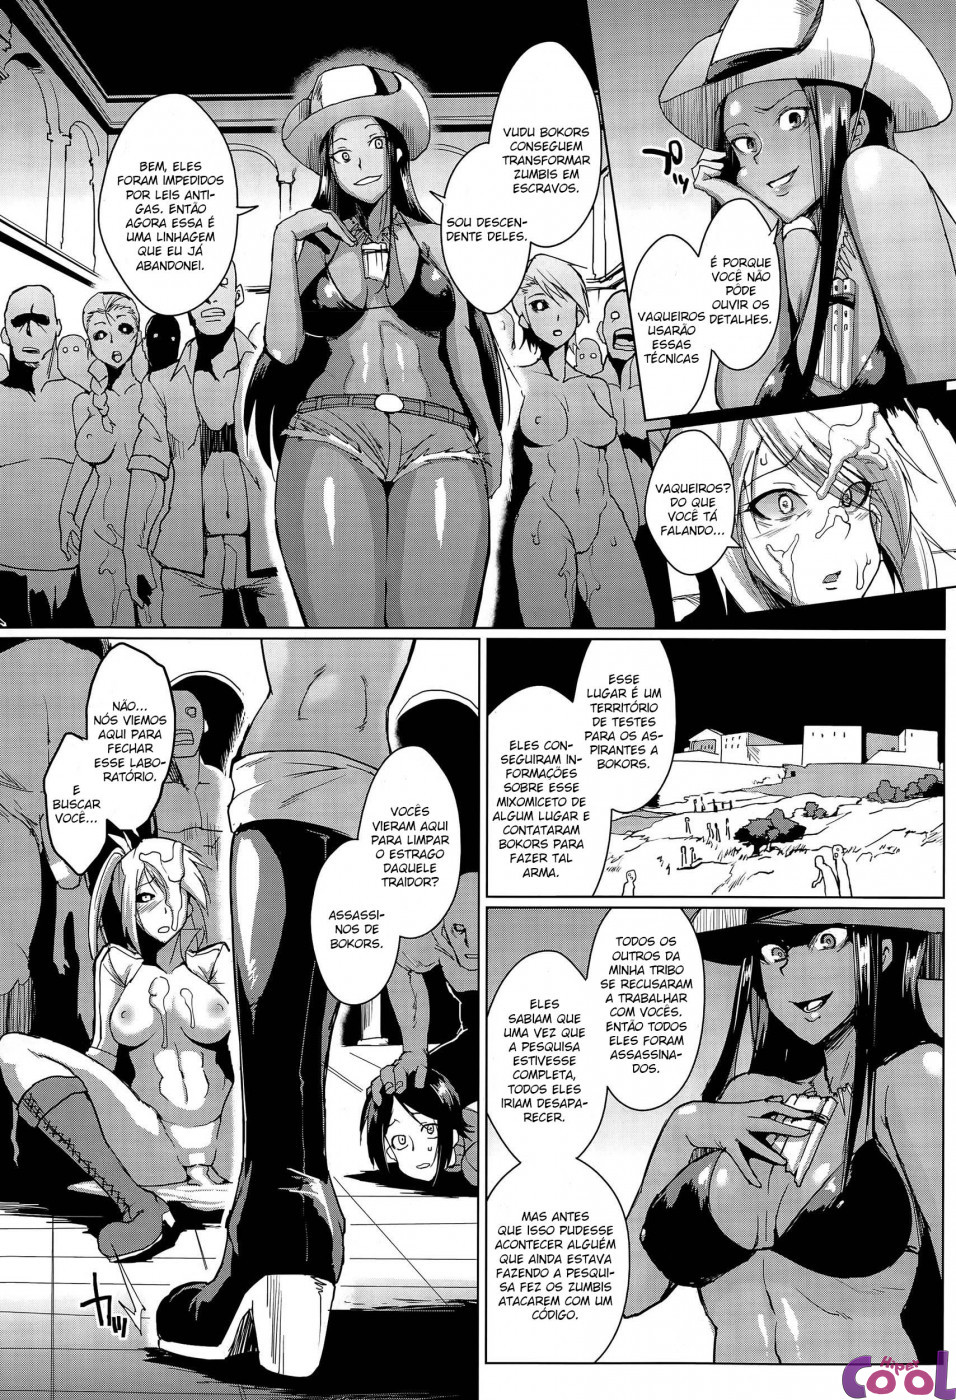 voodoo-squad-chuuhen-chapter-01-page-09.jpg